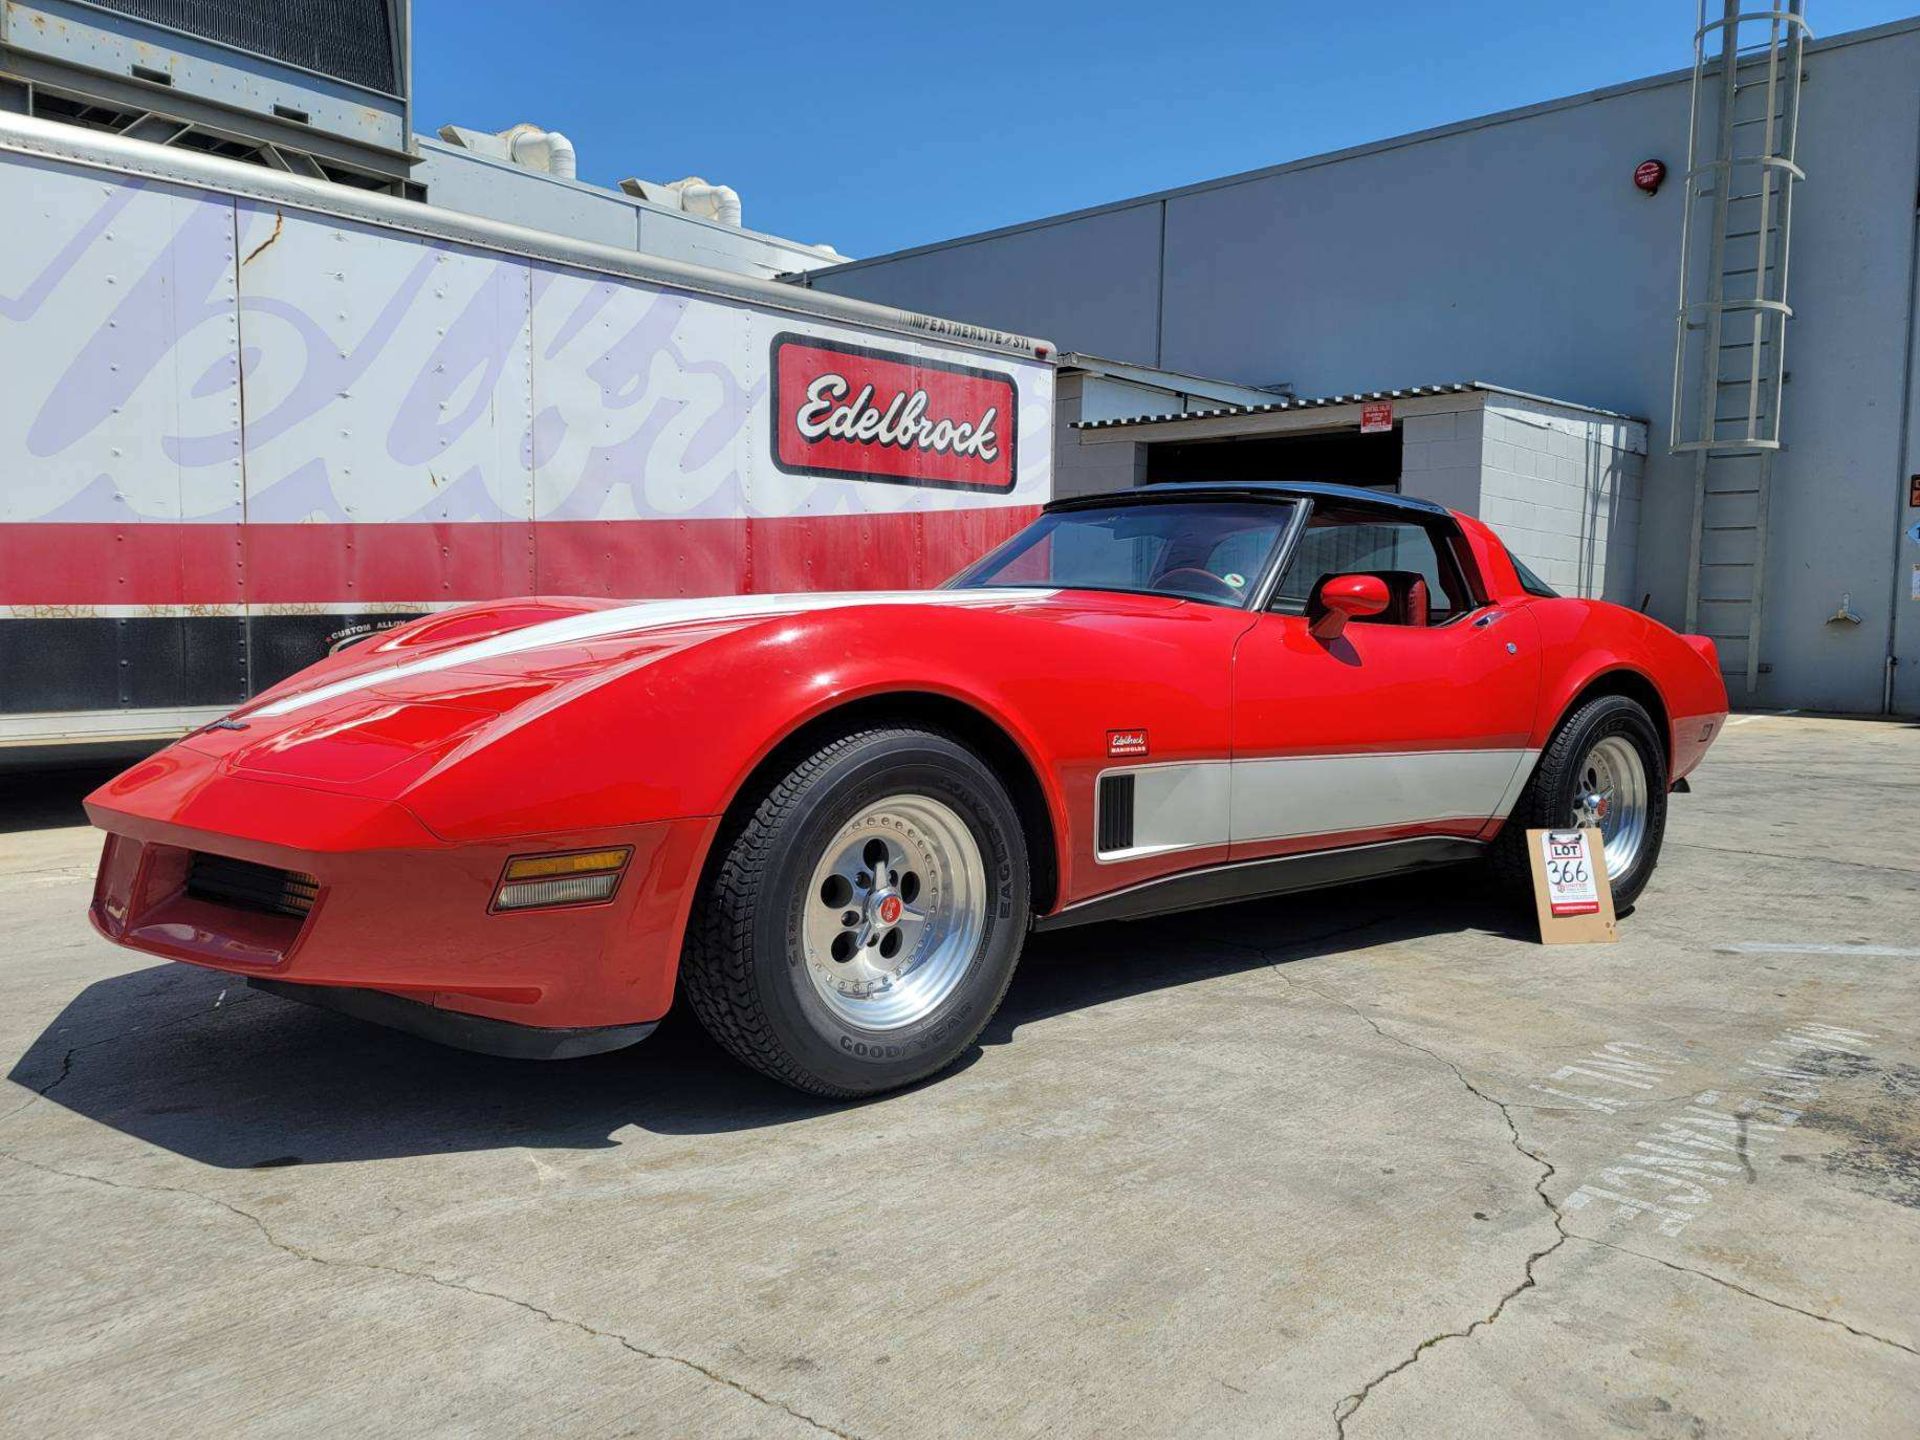 1980 CHEVROLET CORVETTE, WAS VIC EDELBROCK'S PERSONAL CAR BOUGHT FOR R&D, RED INTERIOR, TITLE ONLY.